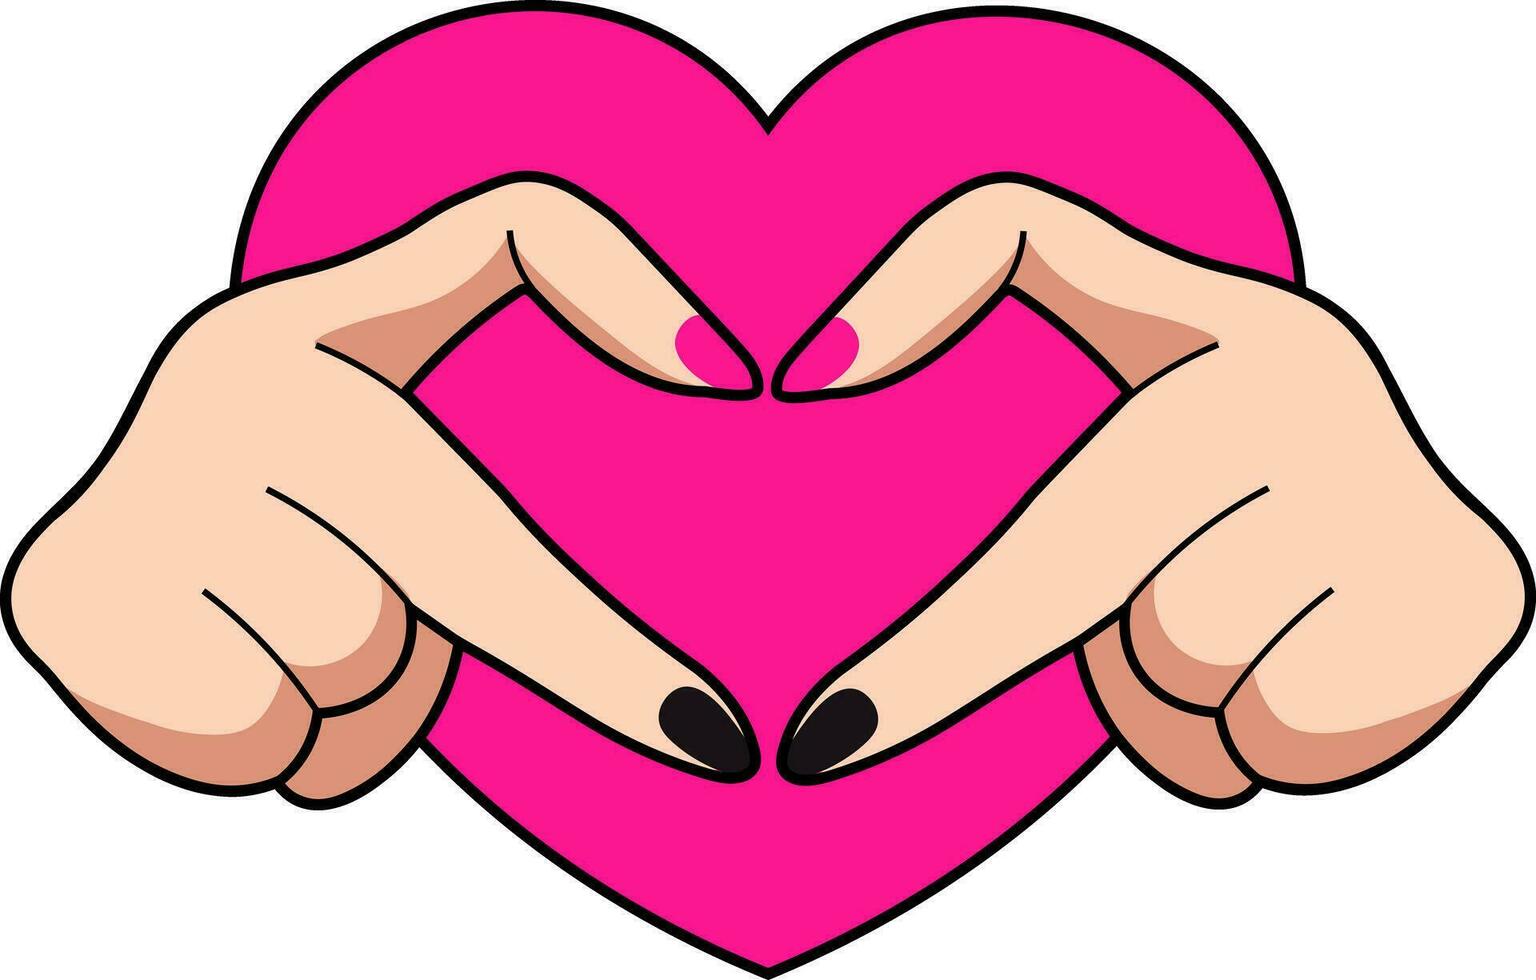 Emo heart from fingers in acid pink color. Bright vector illustration